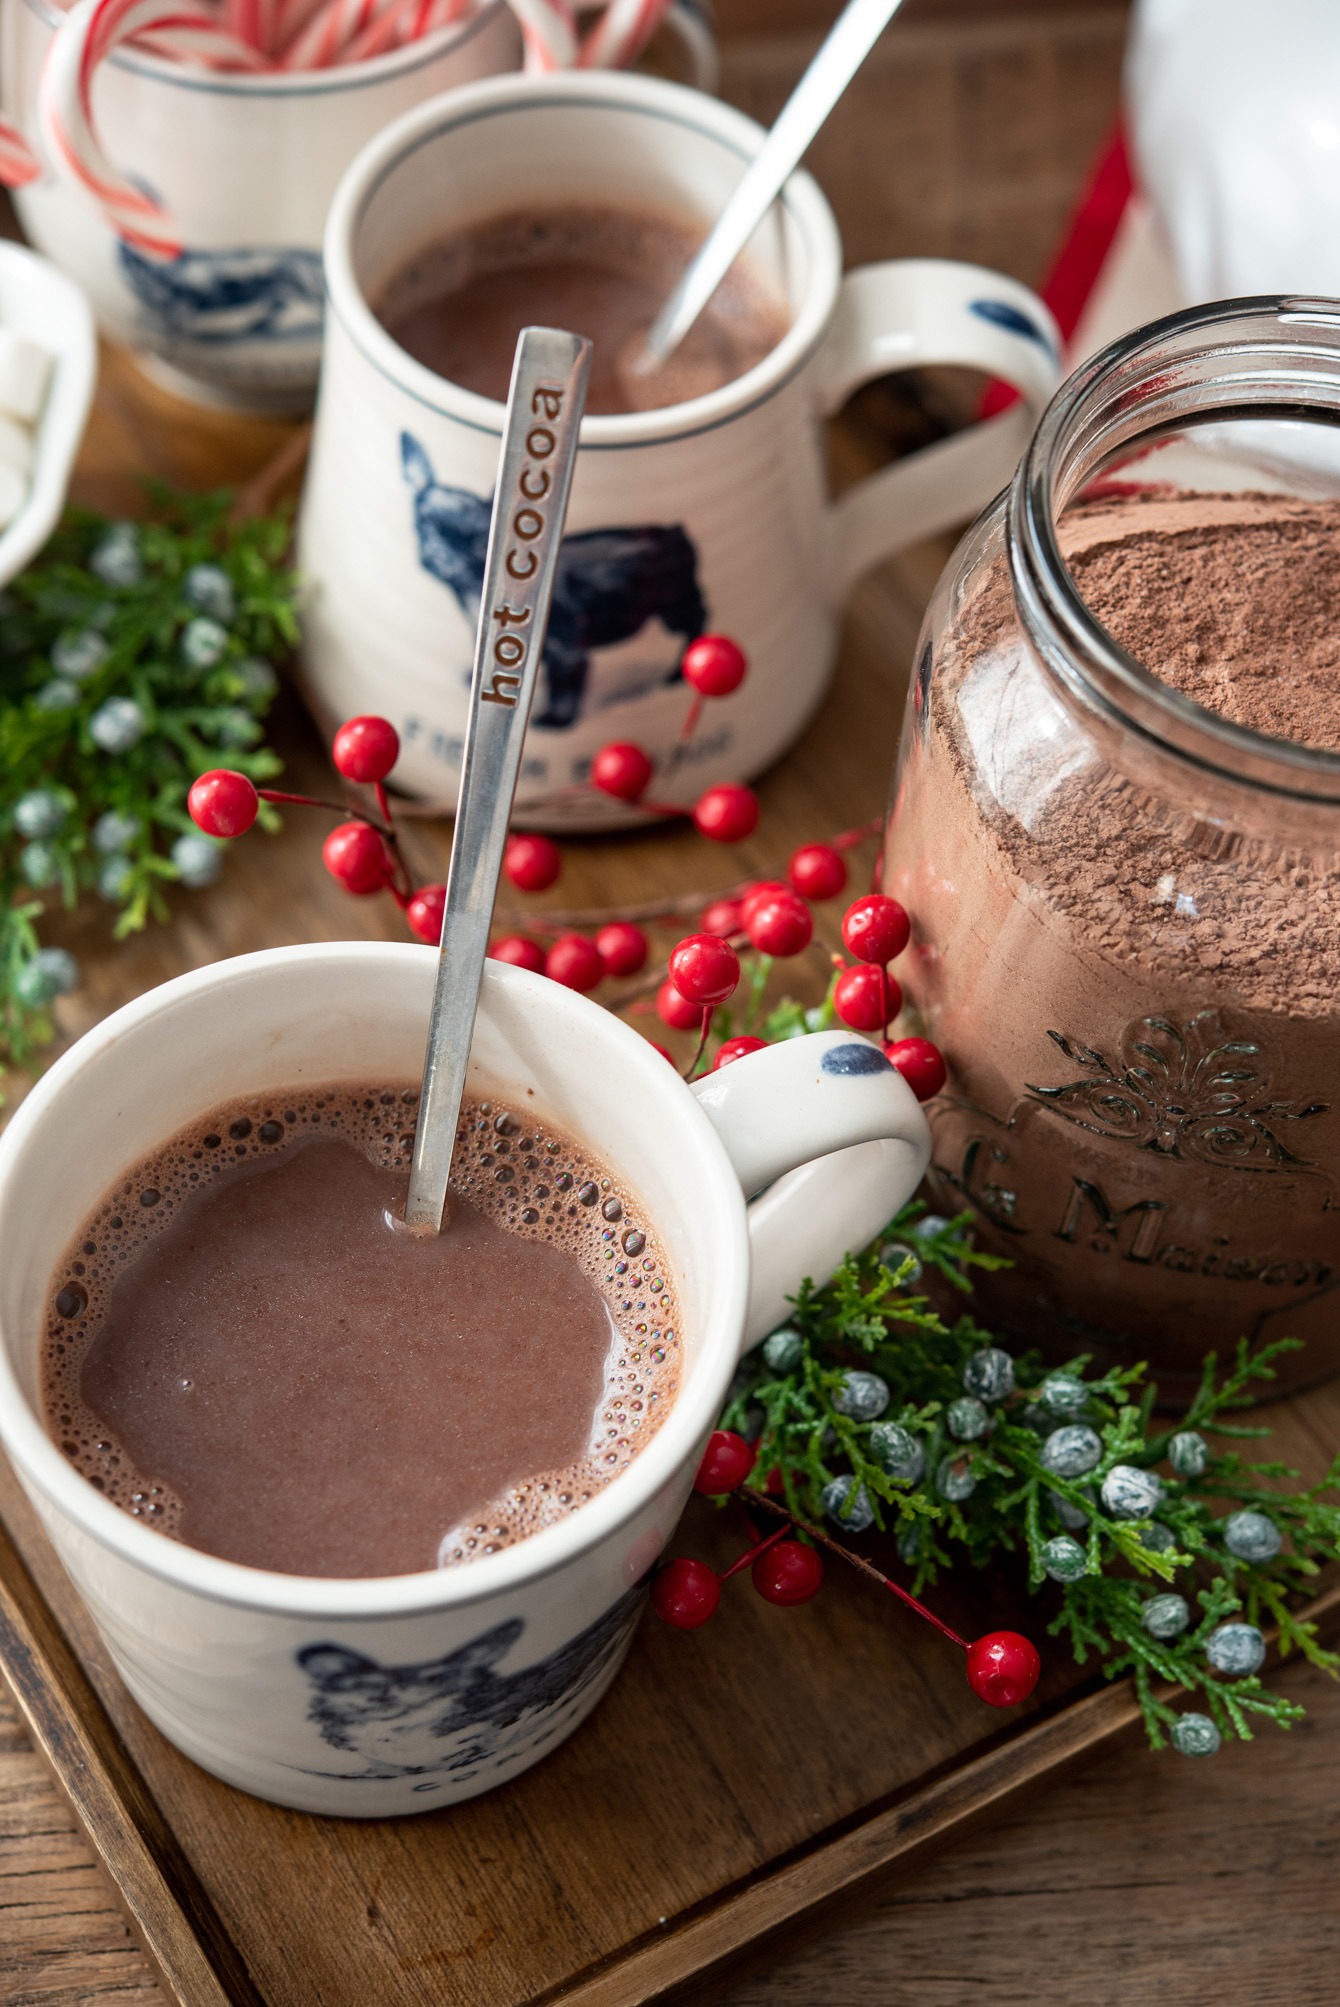 Hot cocoa made with homemade mix in a mug cup.